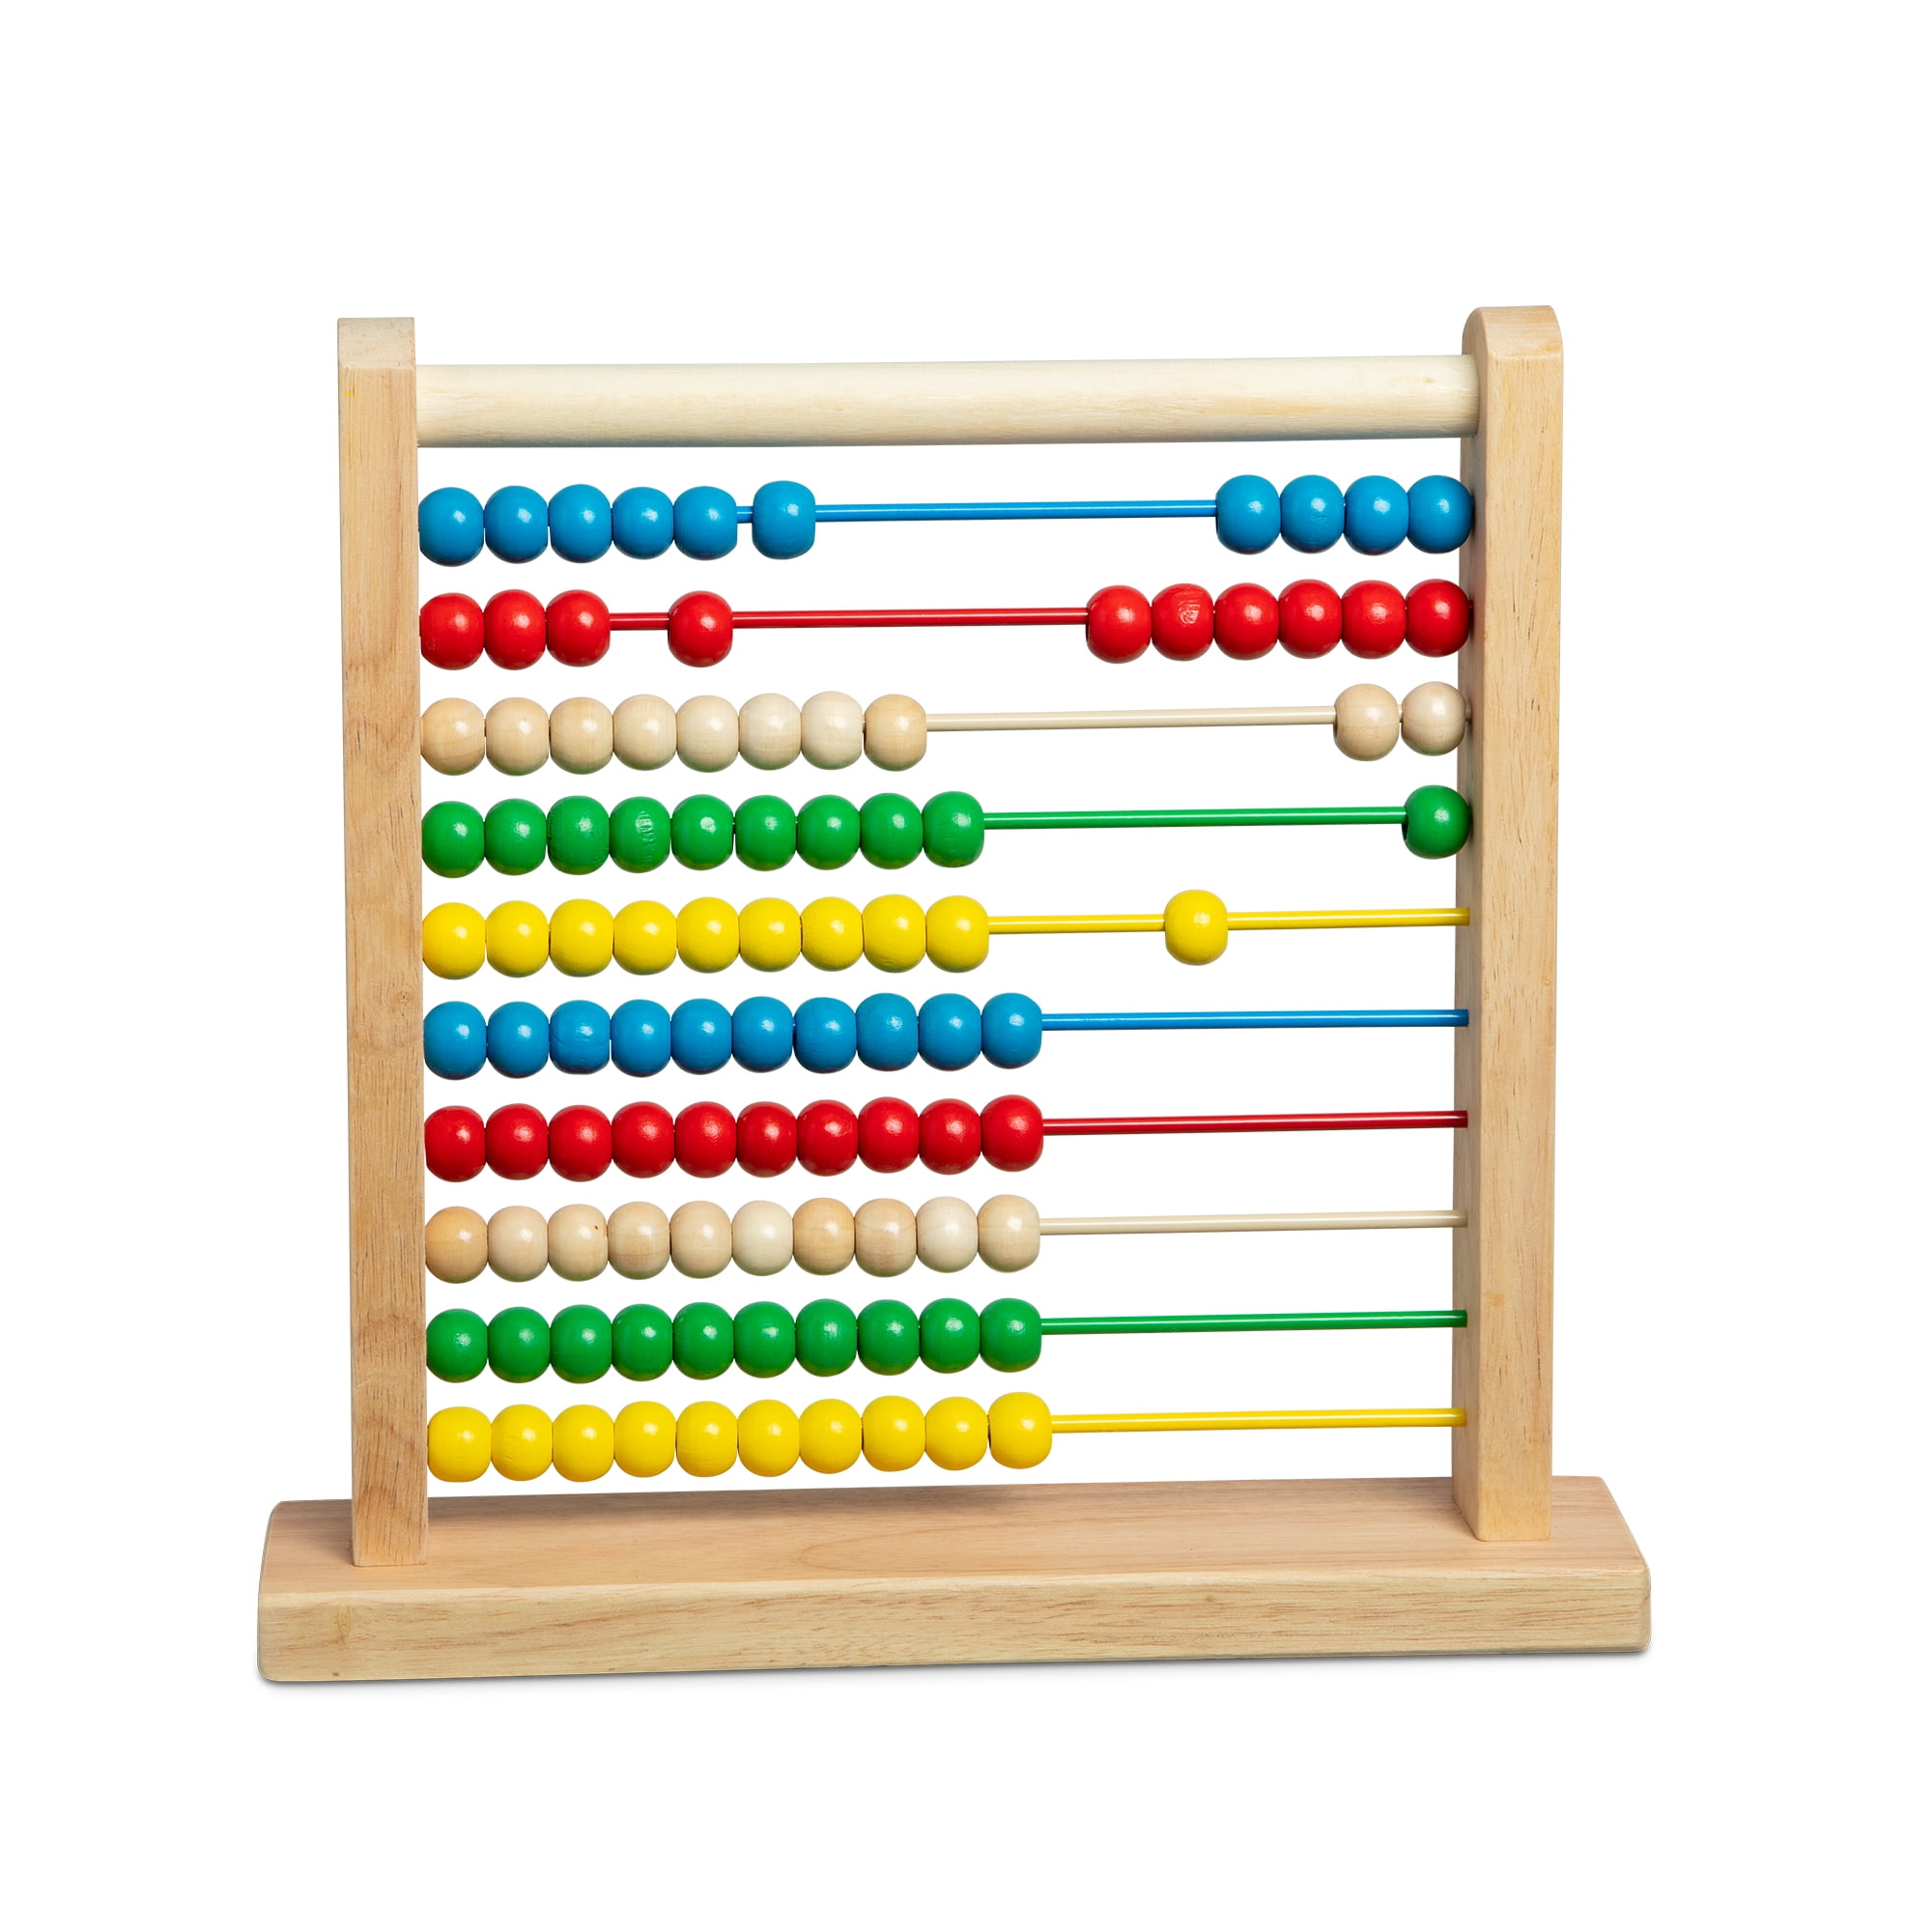 Abacus Toys,Calculator Educational Counting Toy with 100 Beads Learning Abacus for Kids Children Toddler Boy Girl